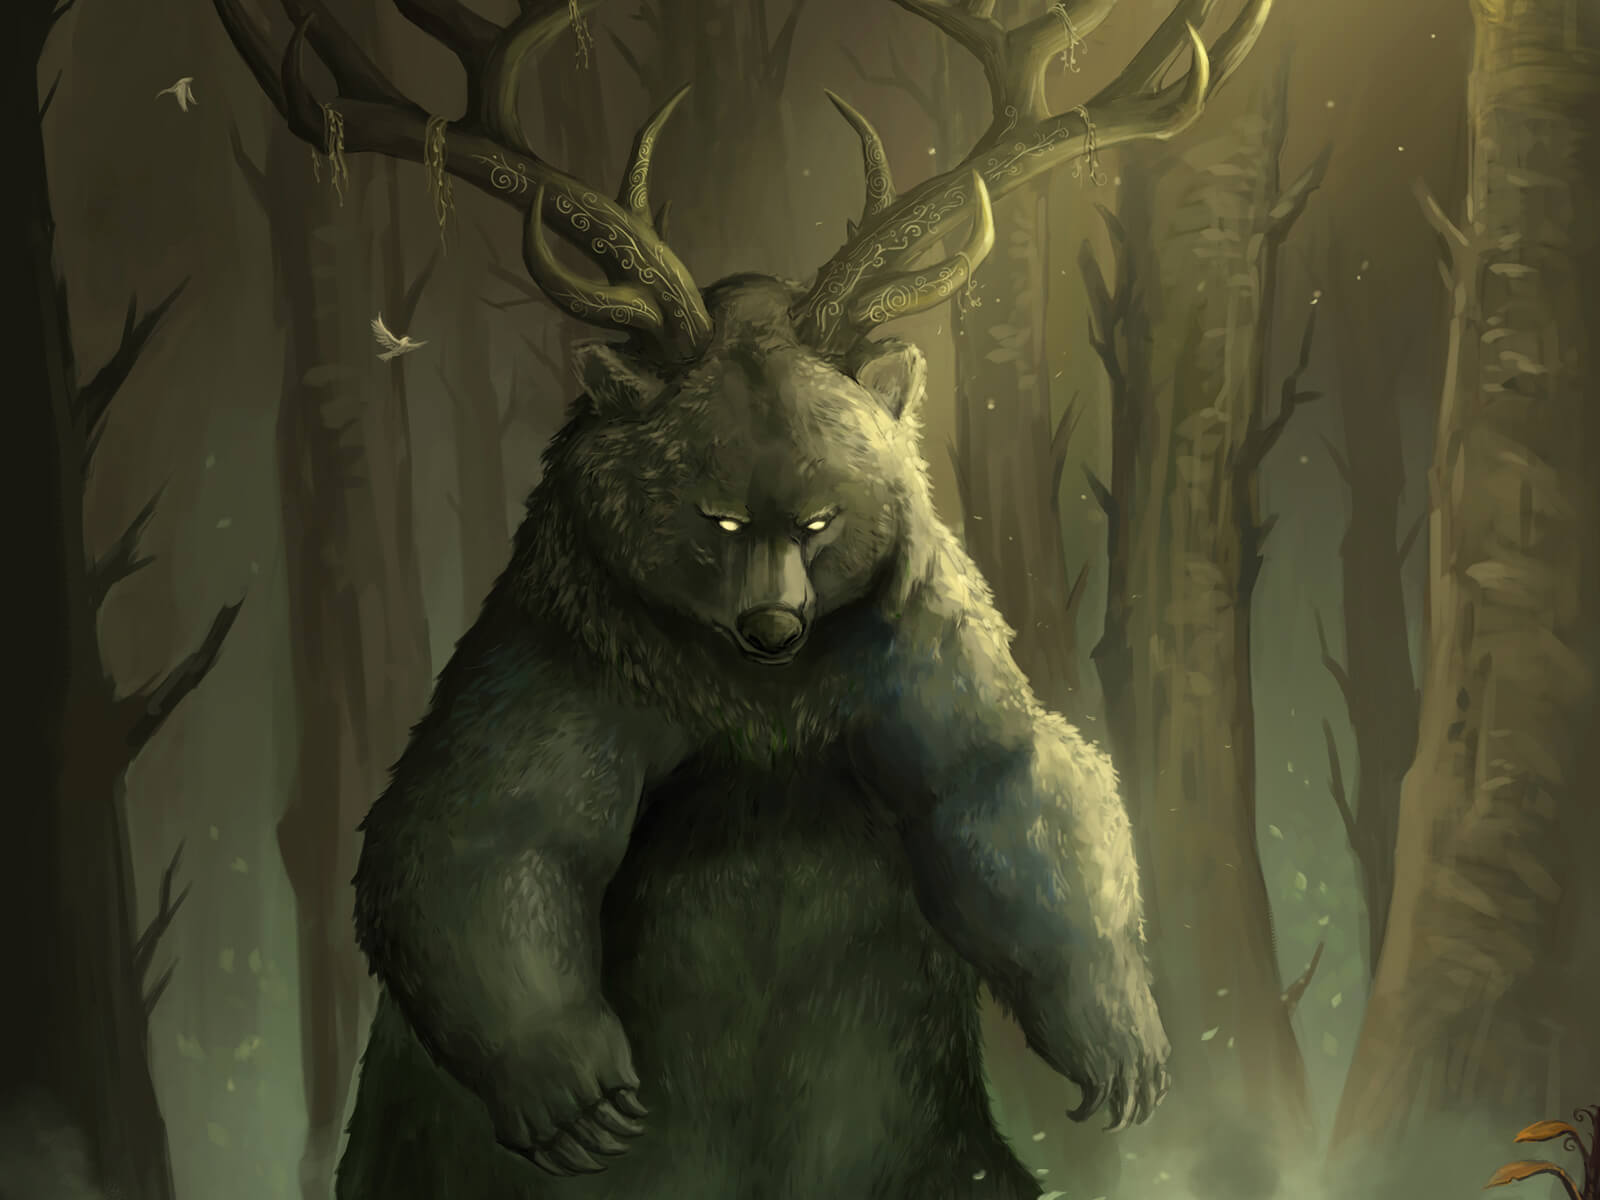 A man with an ax surrounded by tree stumps stands before an enormous upright bear with massive antlers in a dimly lit glade.